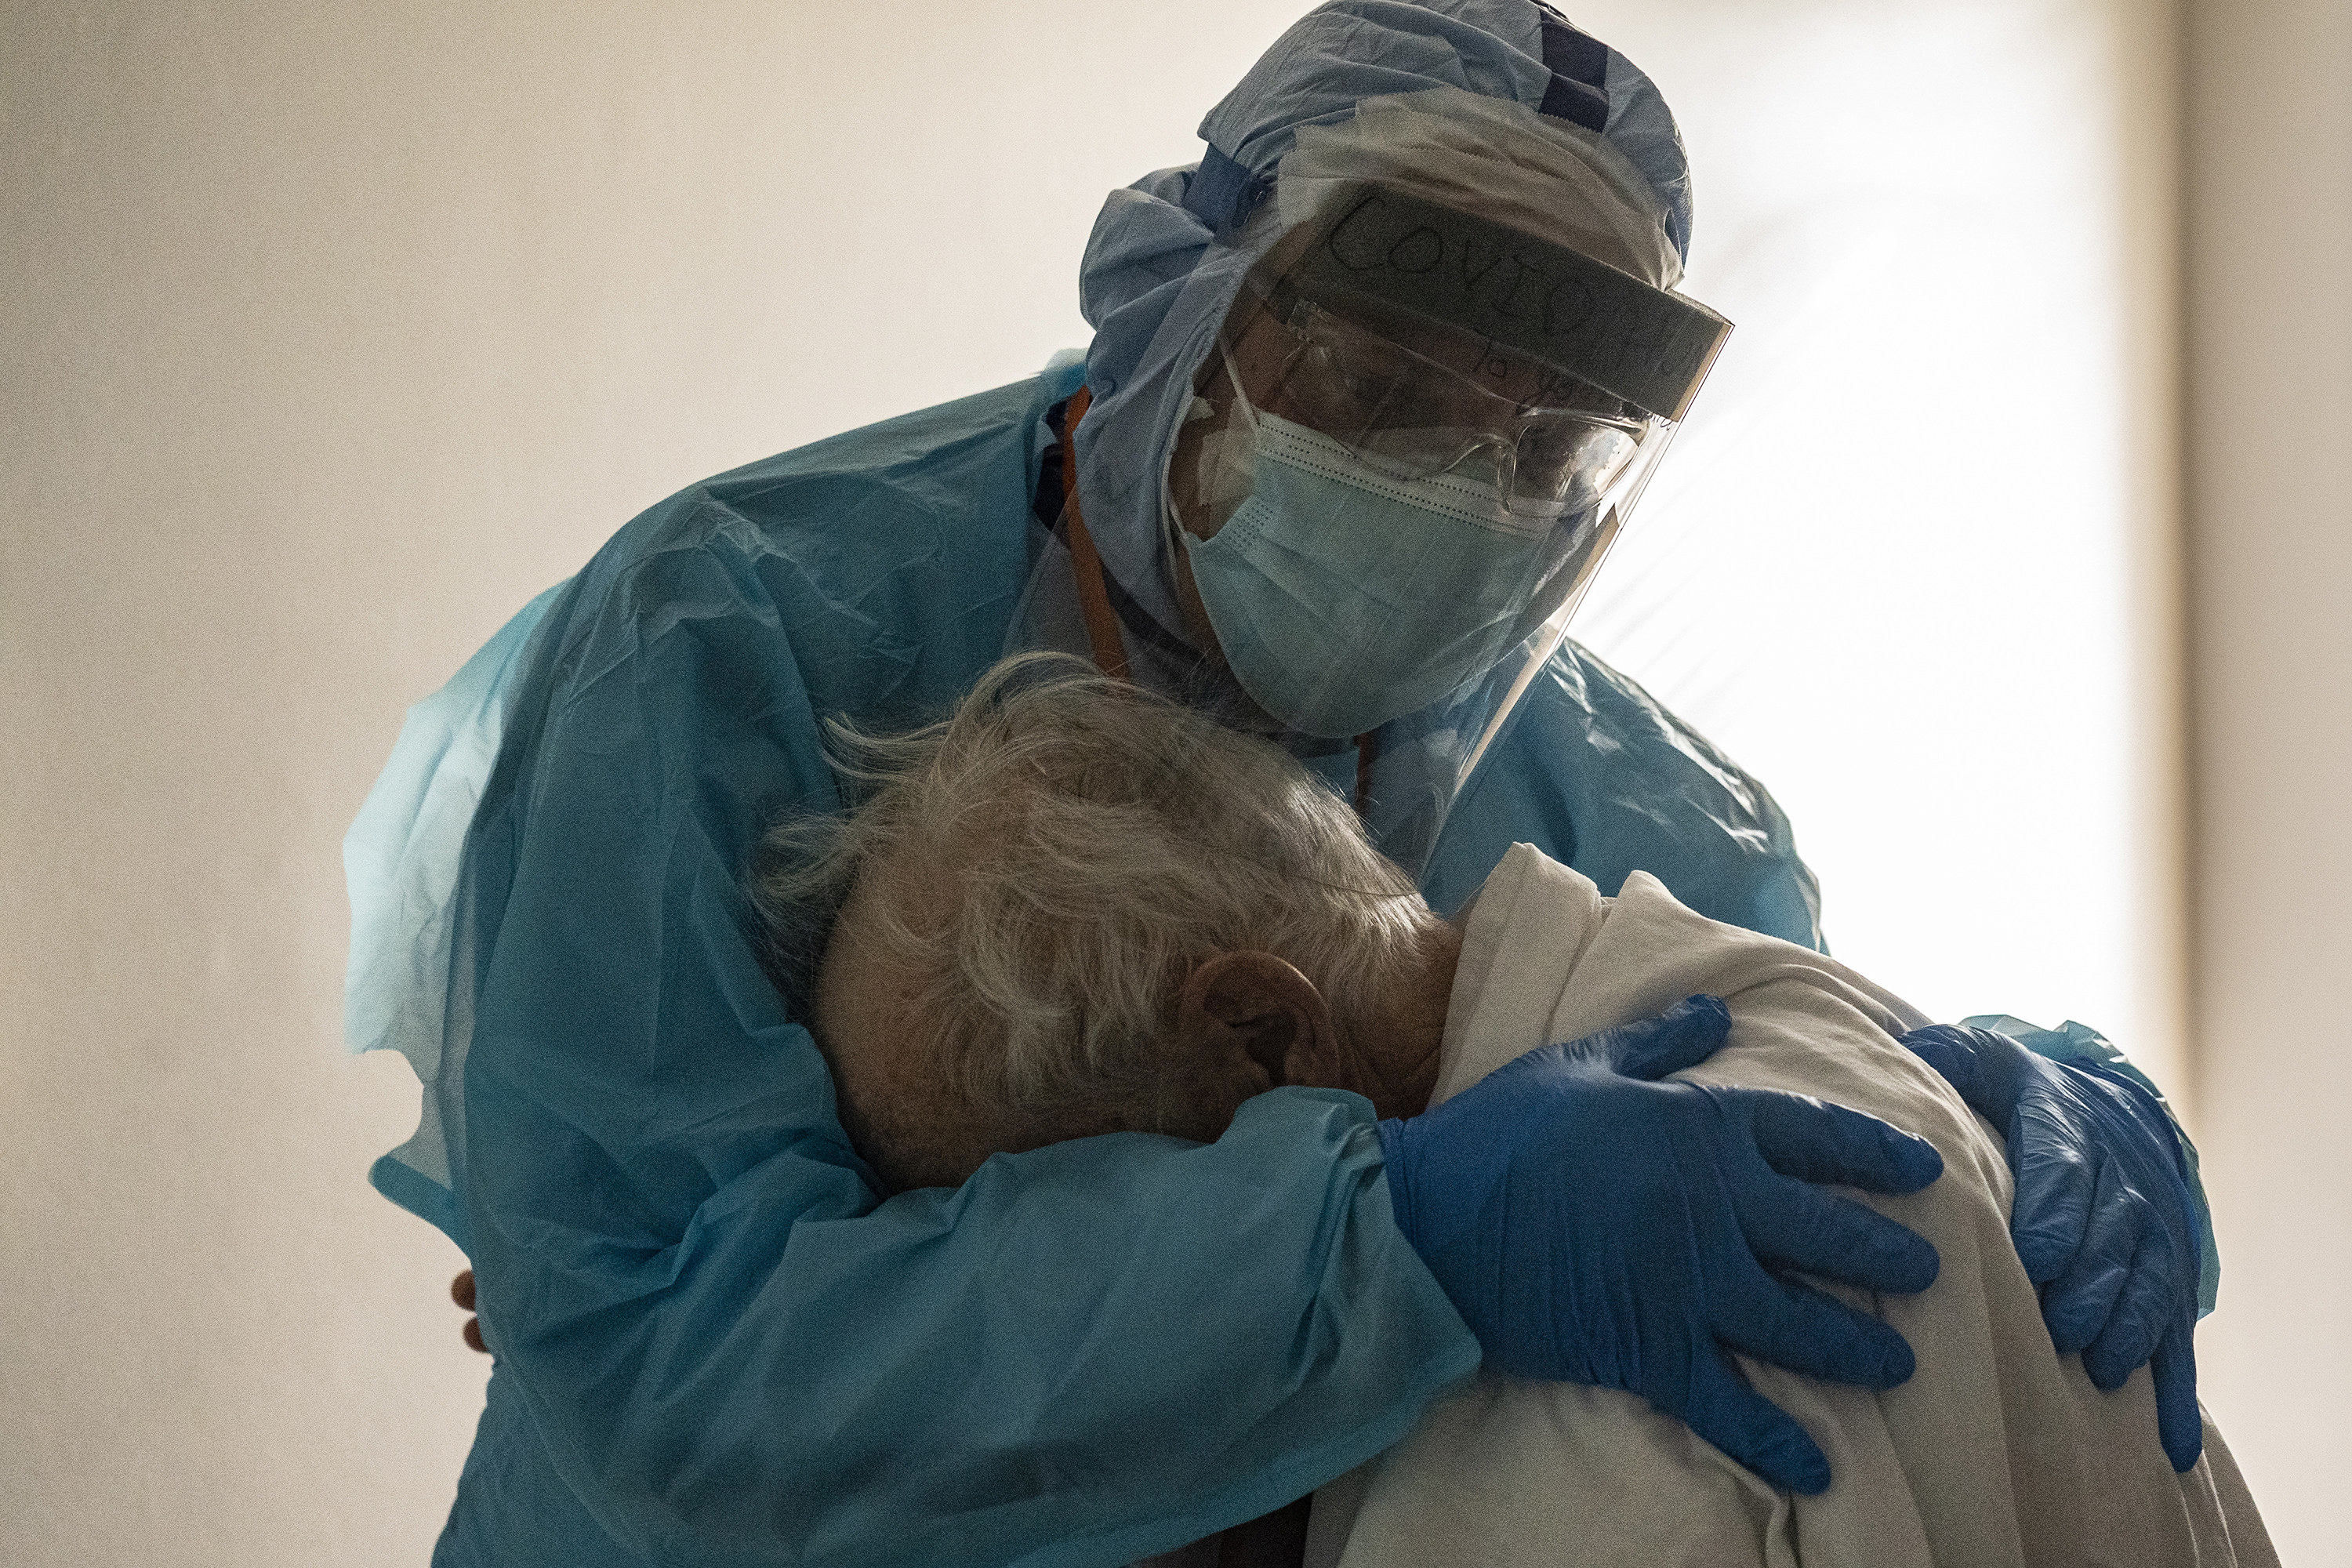 A doctor in full protective gear holds onto a patient and hugs him